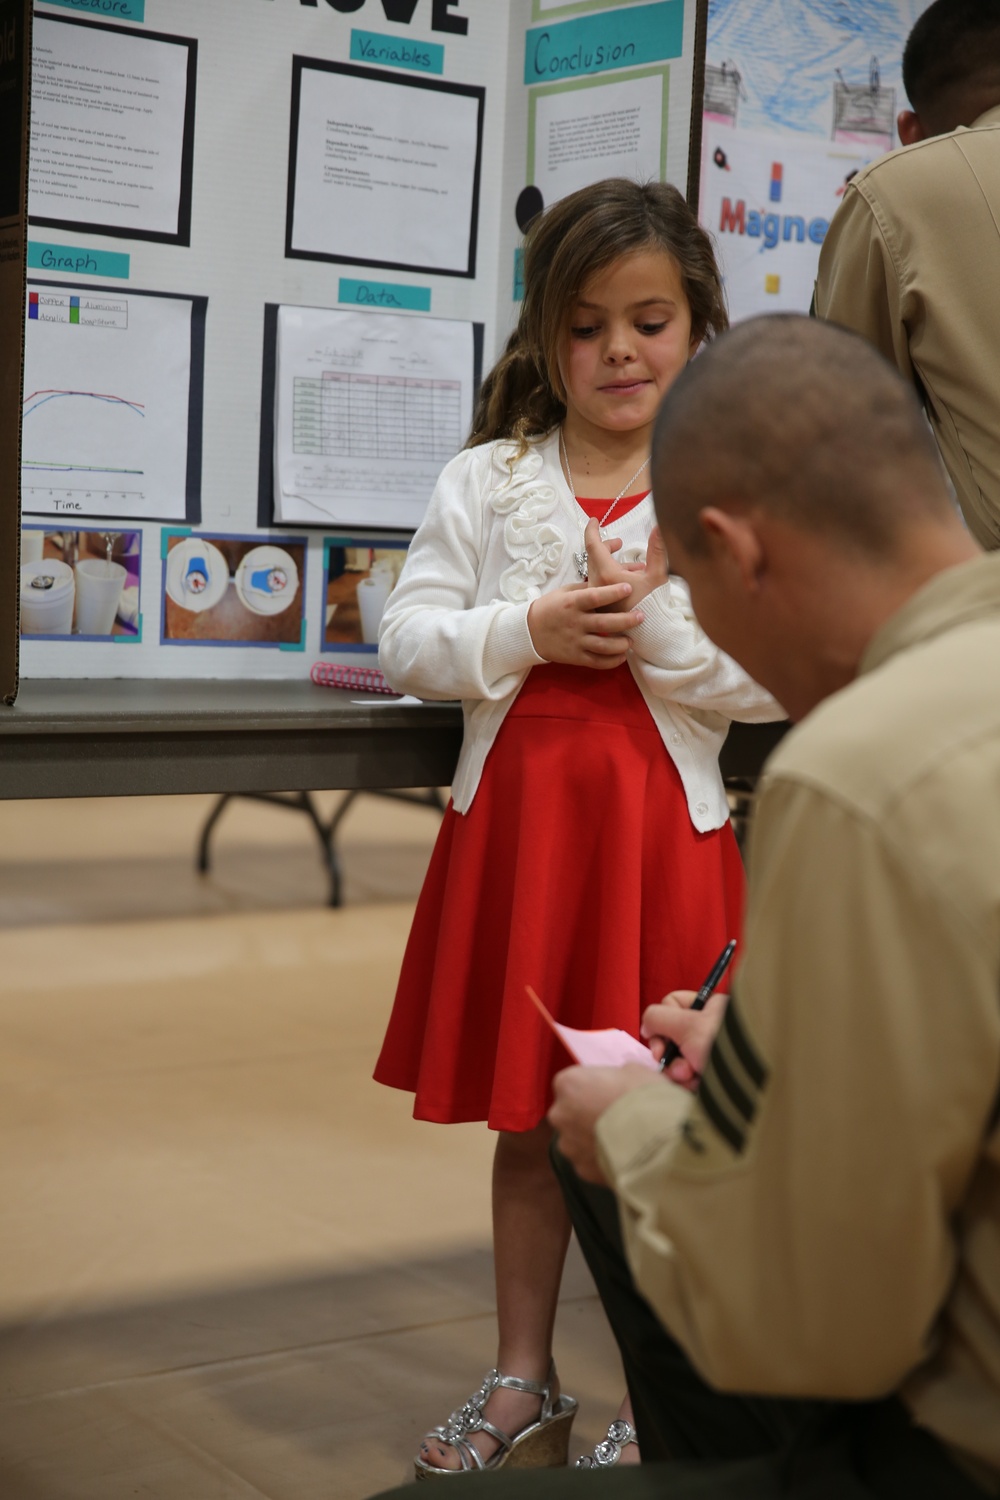 Barstow Marines judge, challenge, interact with local students